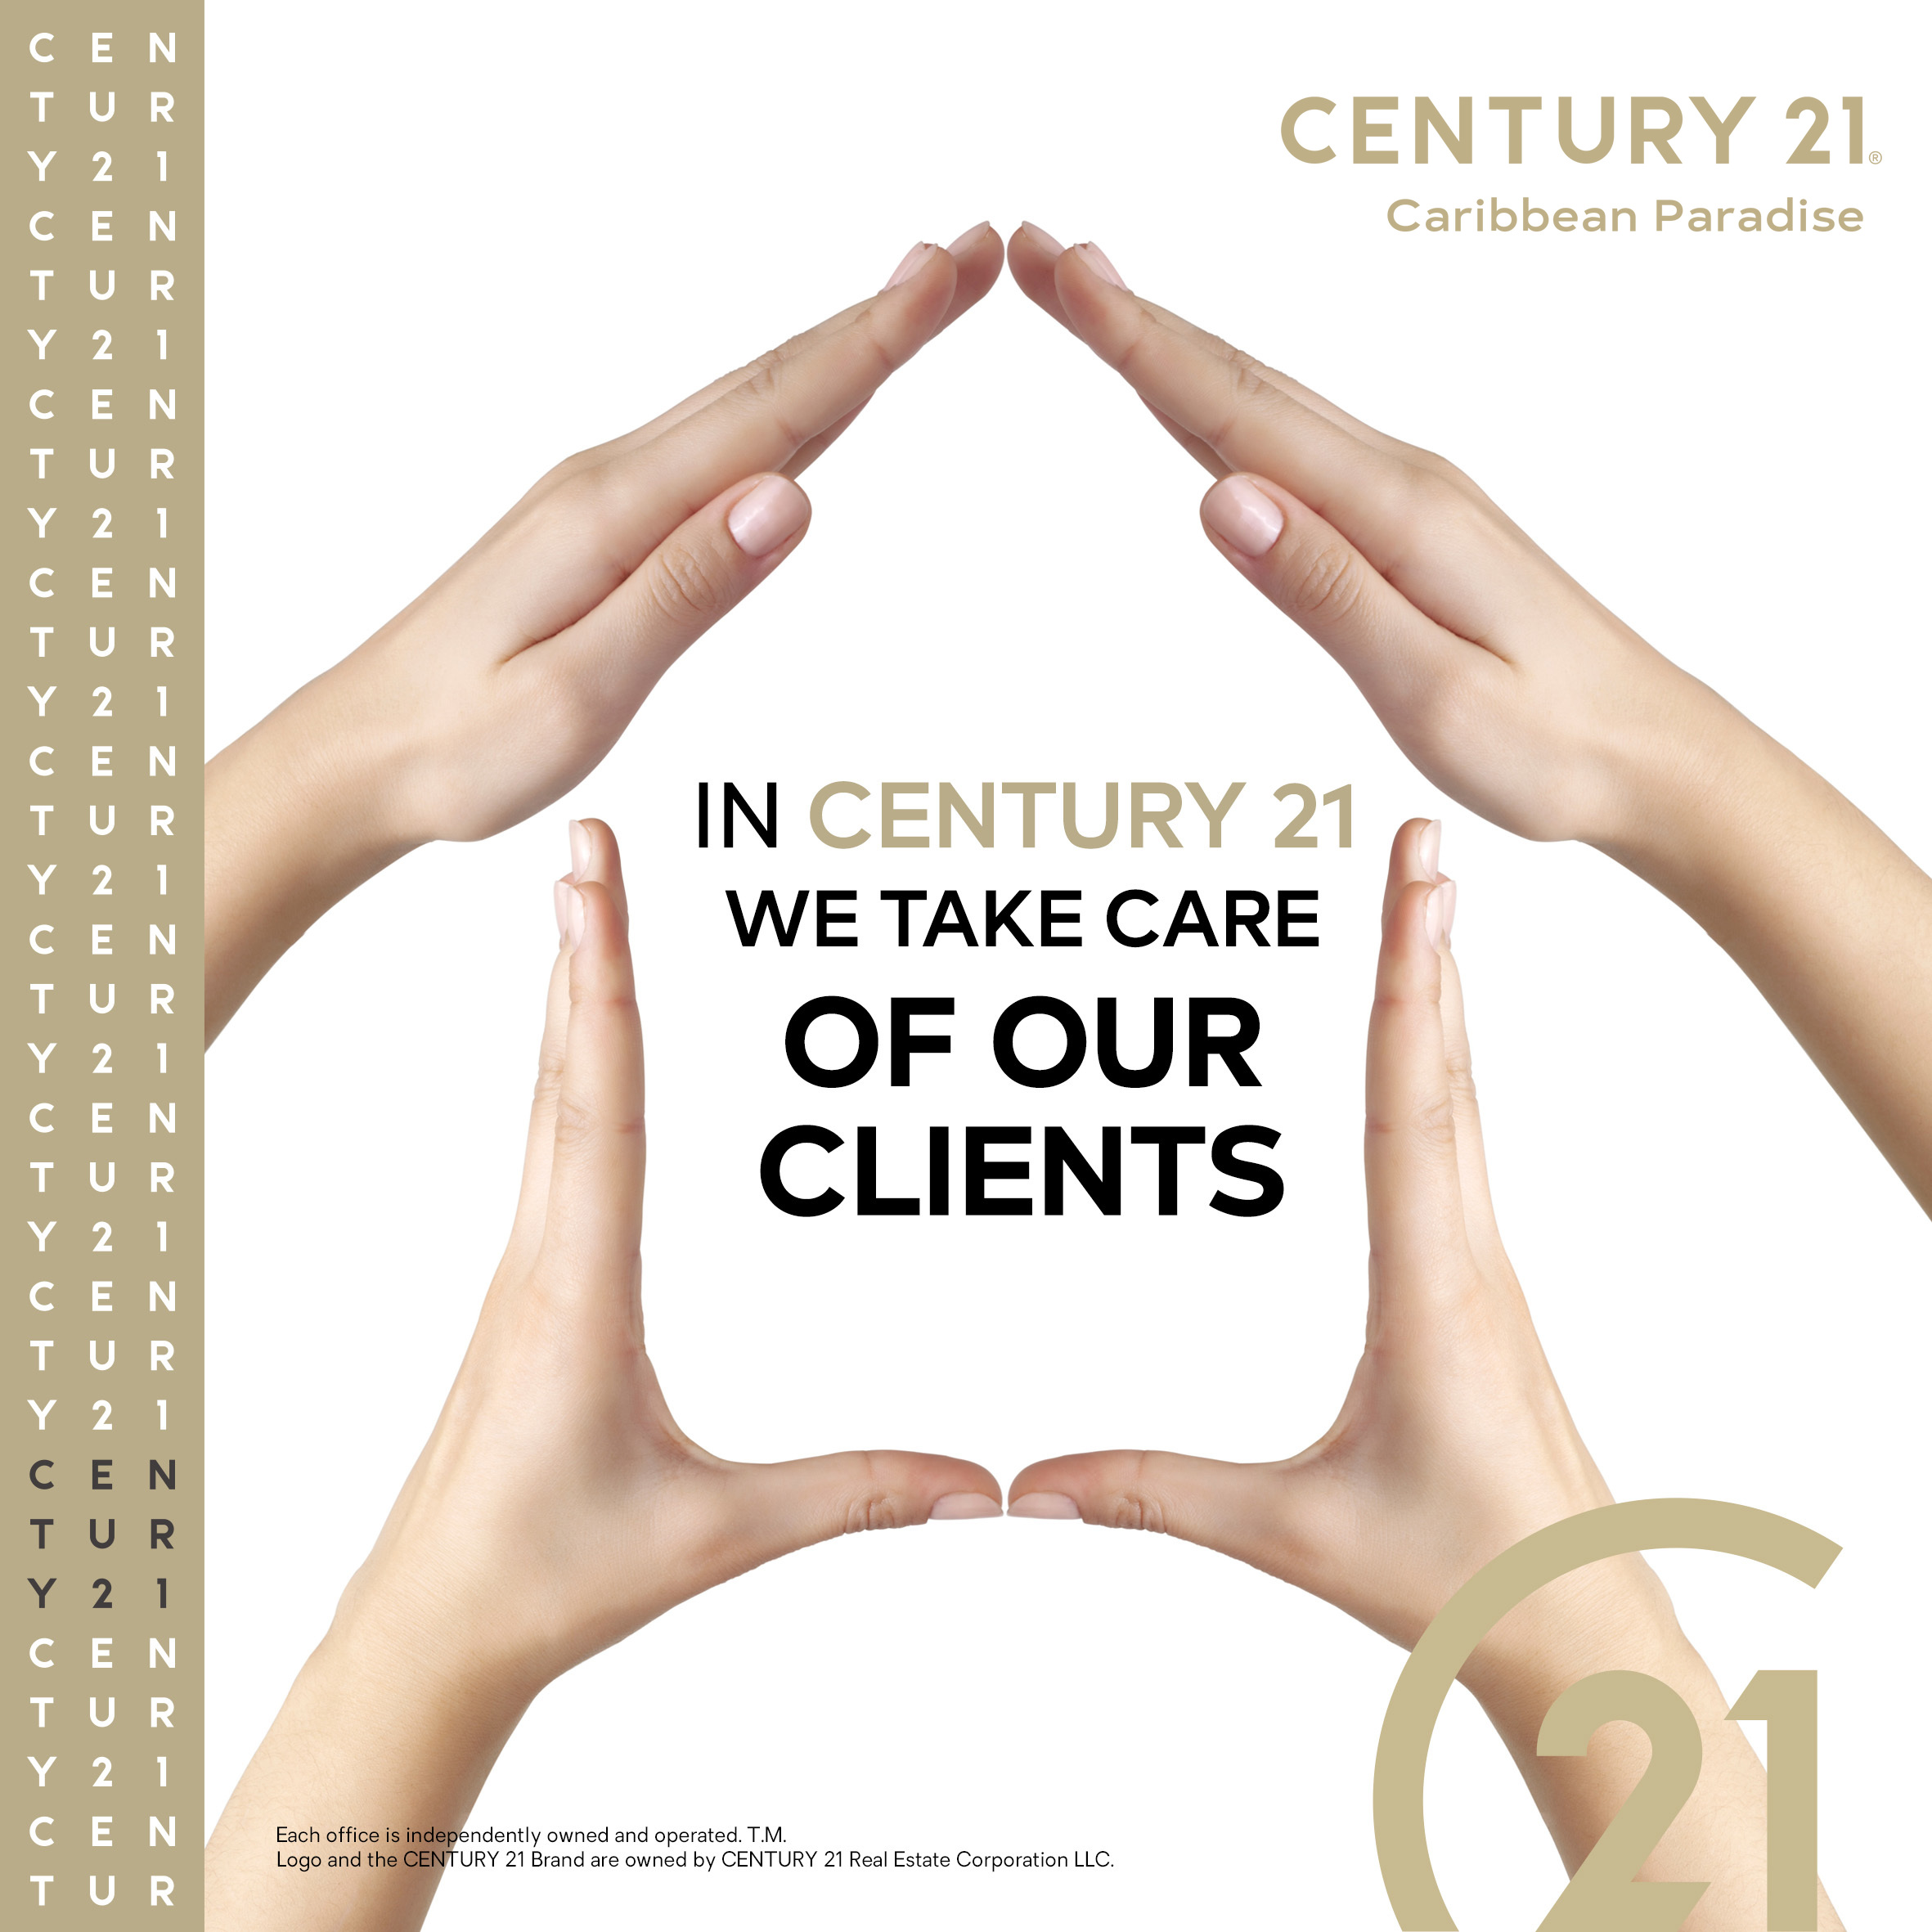 In Century 21 we take care of our clients